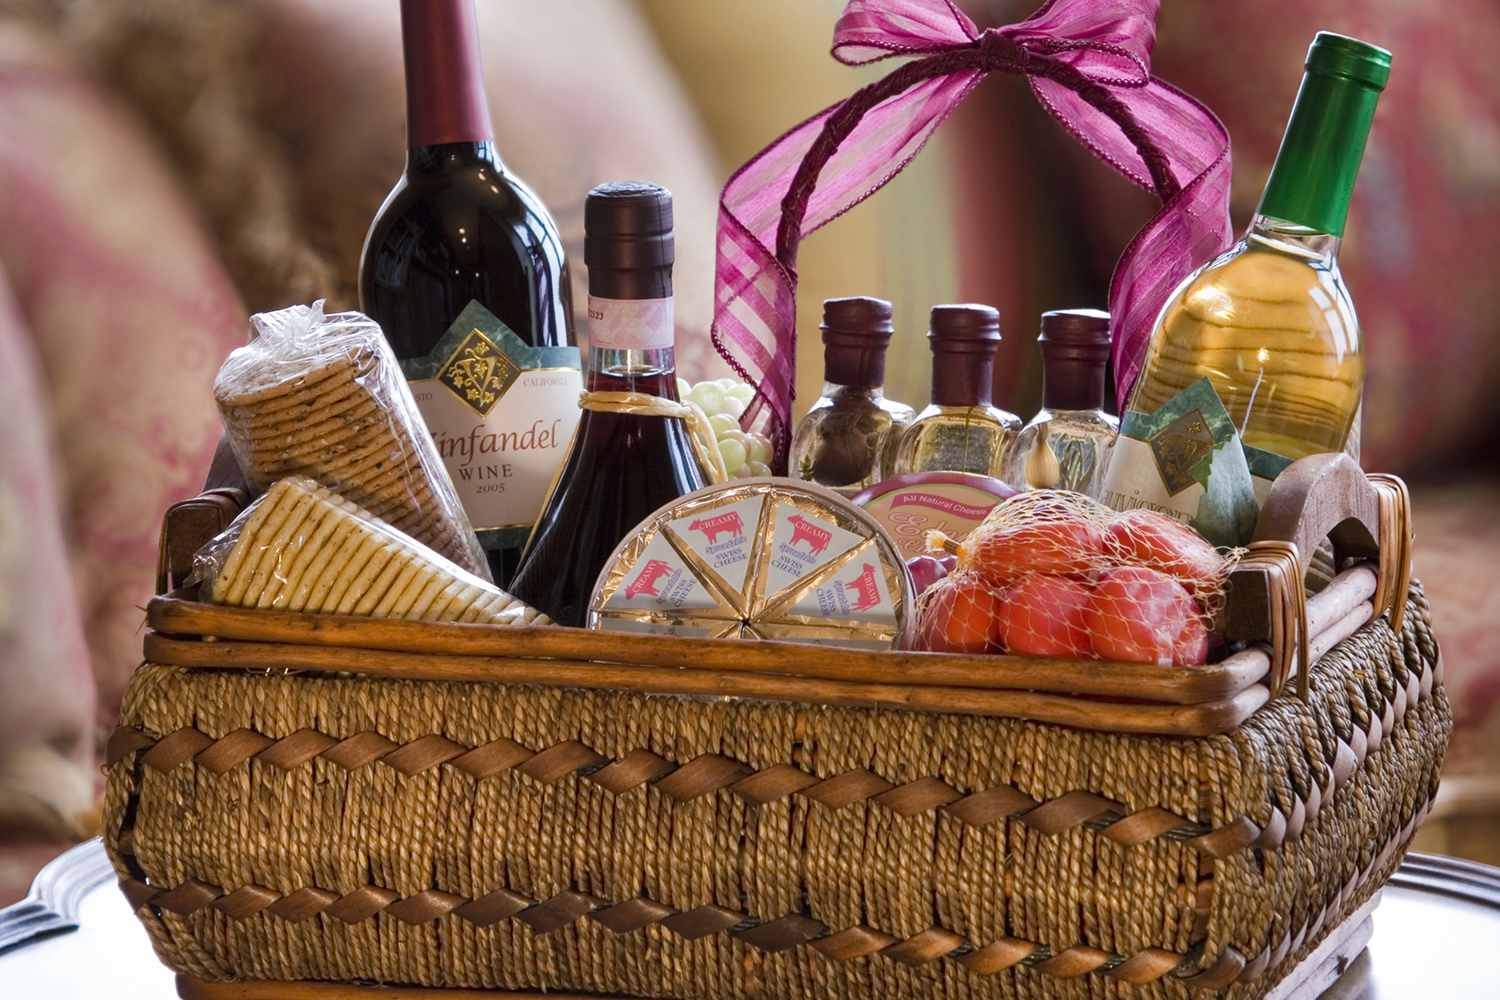 Good Gift Basket Ideas
 10 Great Christmas Gift Ideas for Bartenders